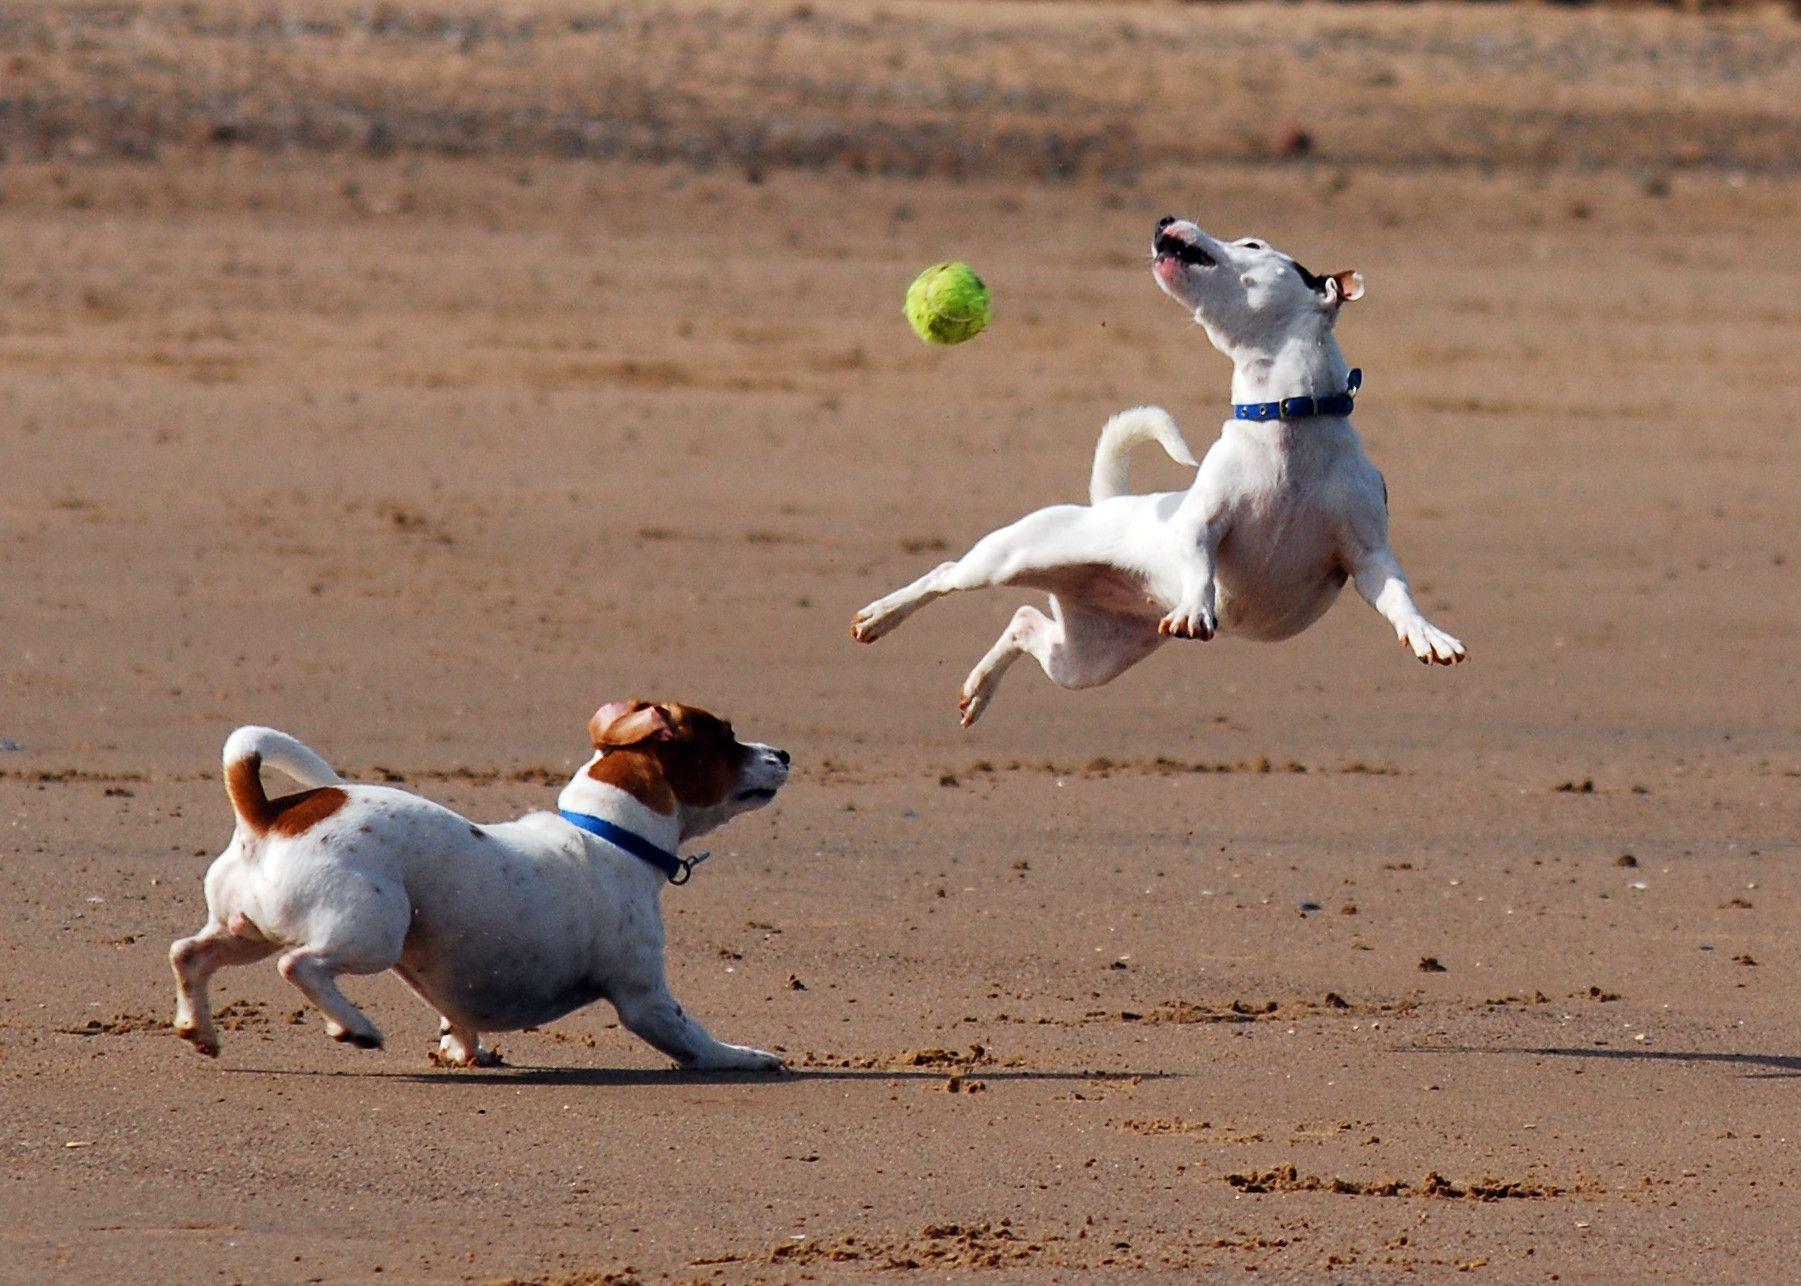 Playing Jack Russell Terrier dogs photo and wallpaper. Beautiful